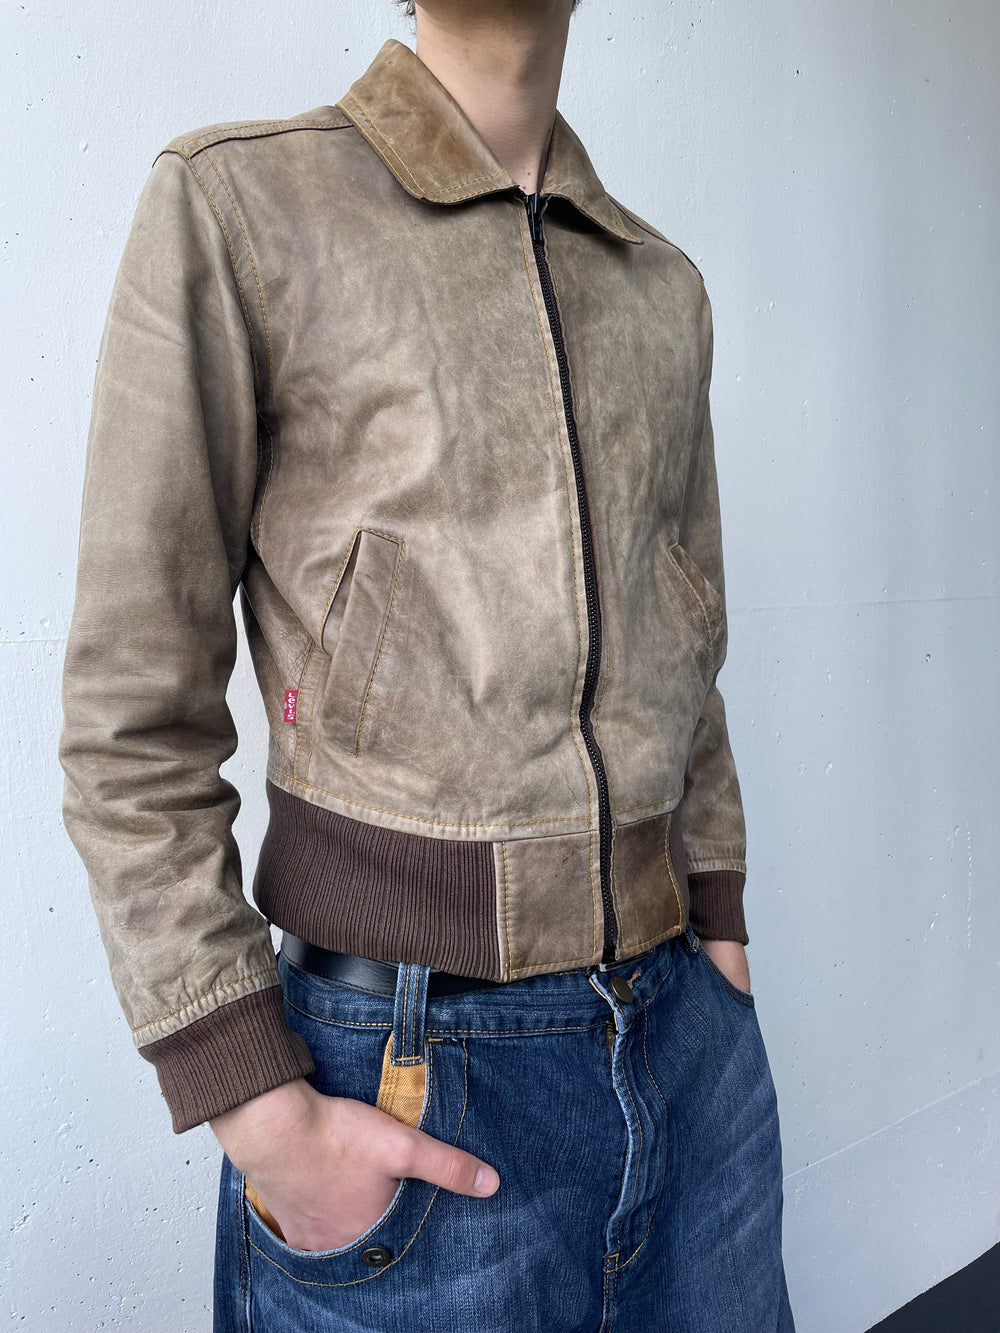 Early 2000s Levi’s Type 1 Leatherjacket (M/L)